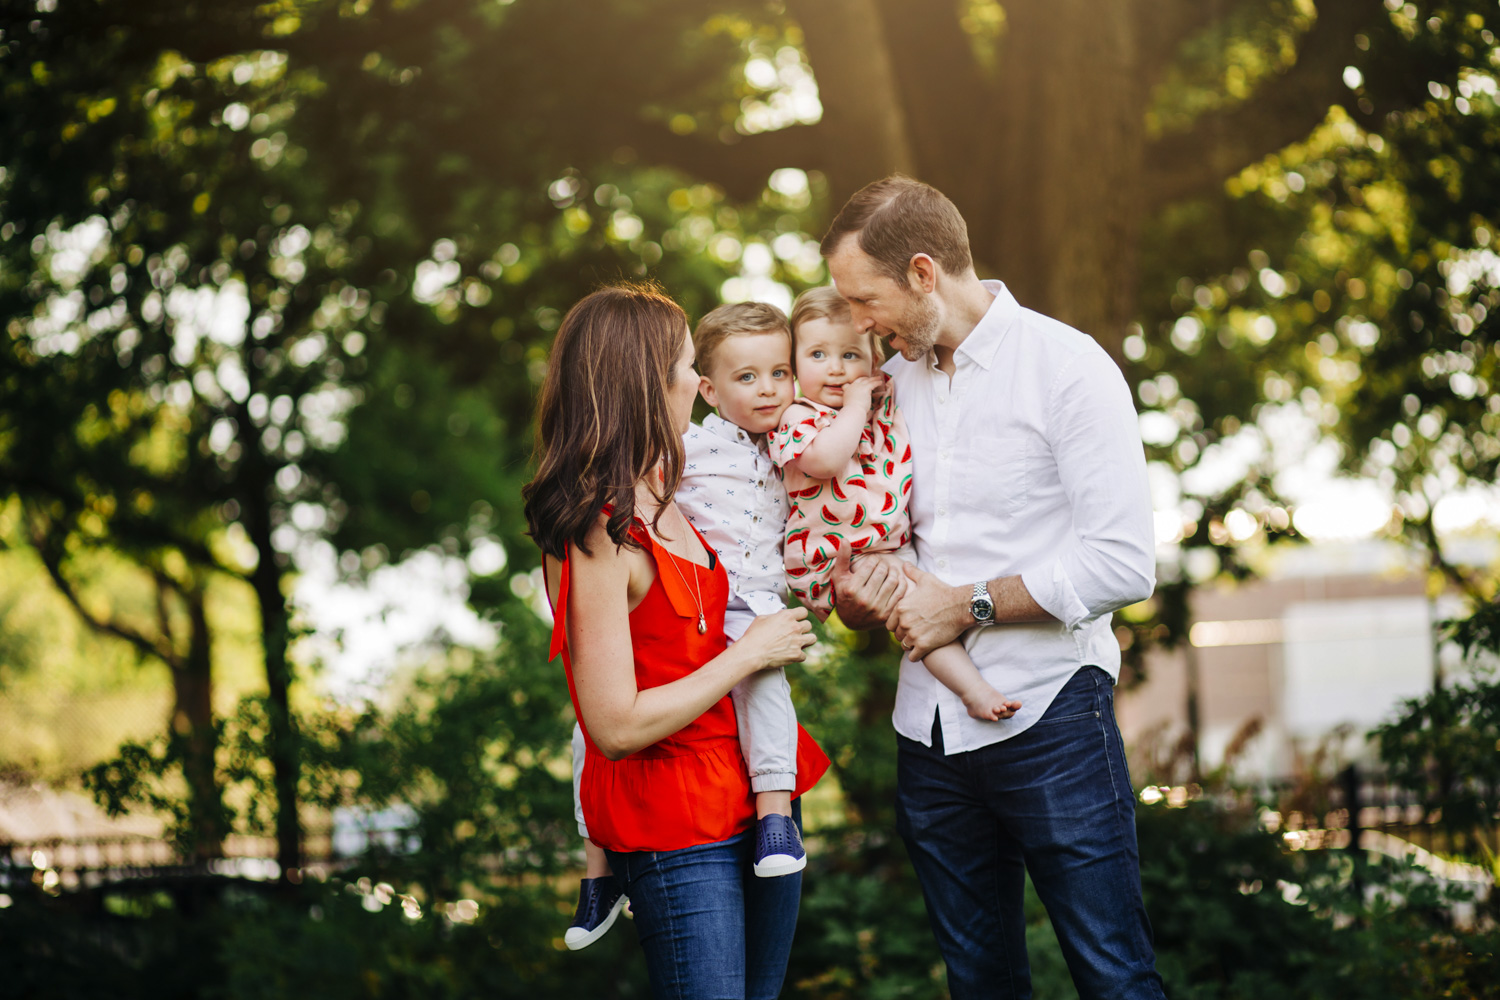 Chicago Family Photographer in Lincoln Park Chicago